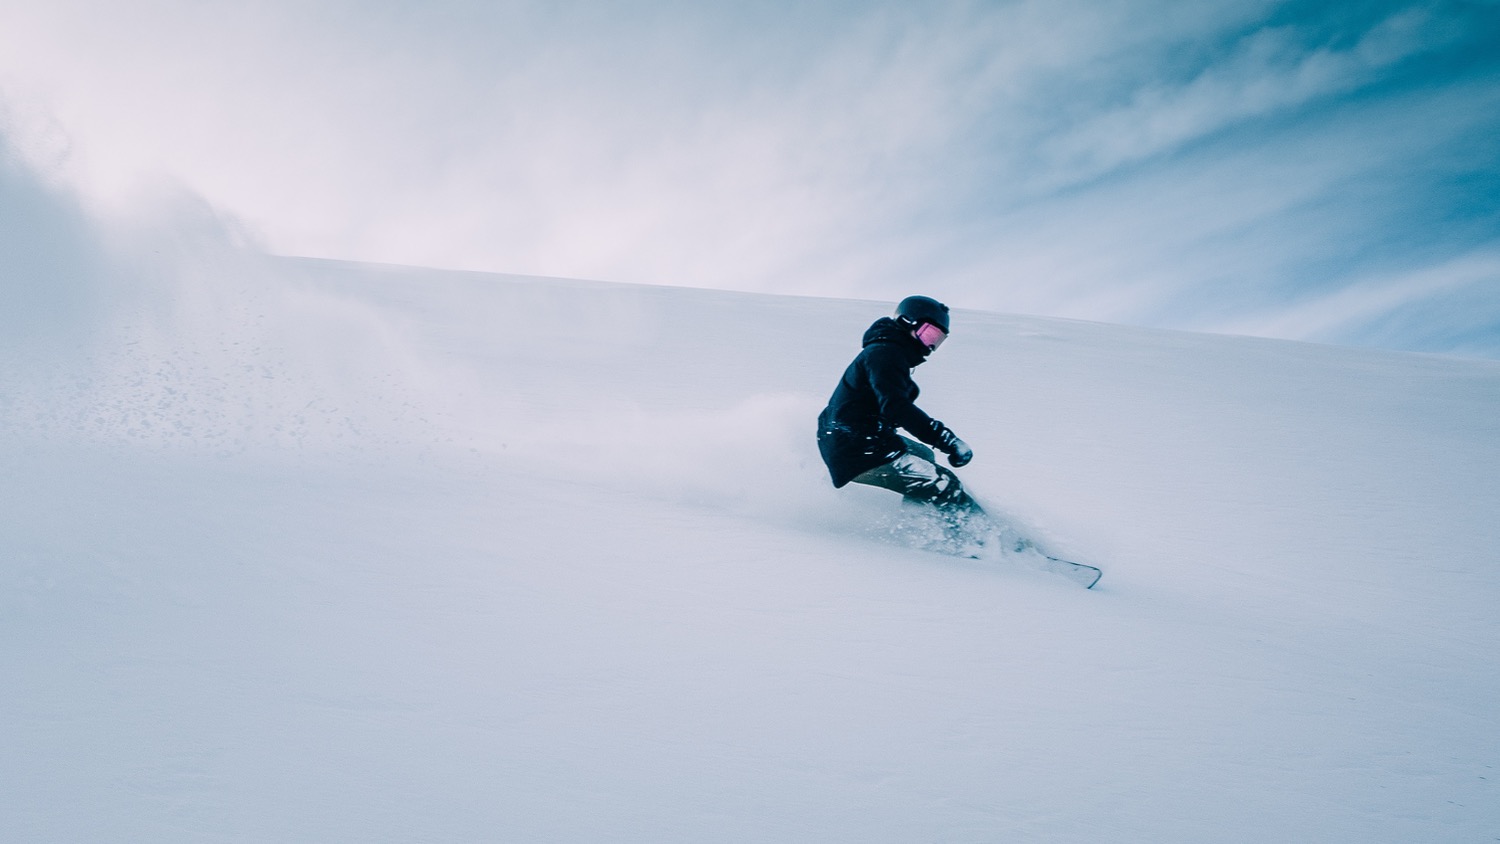 A person snowboarding on a mountainside - Beijing Winter Olympics a Cautionary Climate Tale, Expert Says - College of Natural Resources News - NC State University